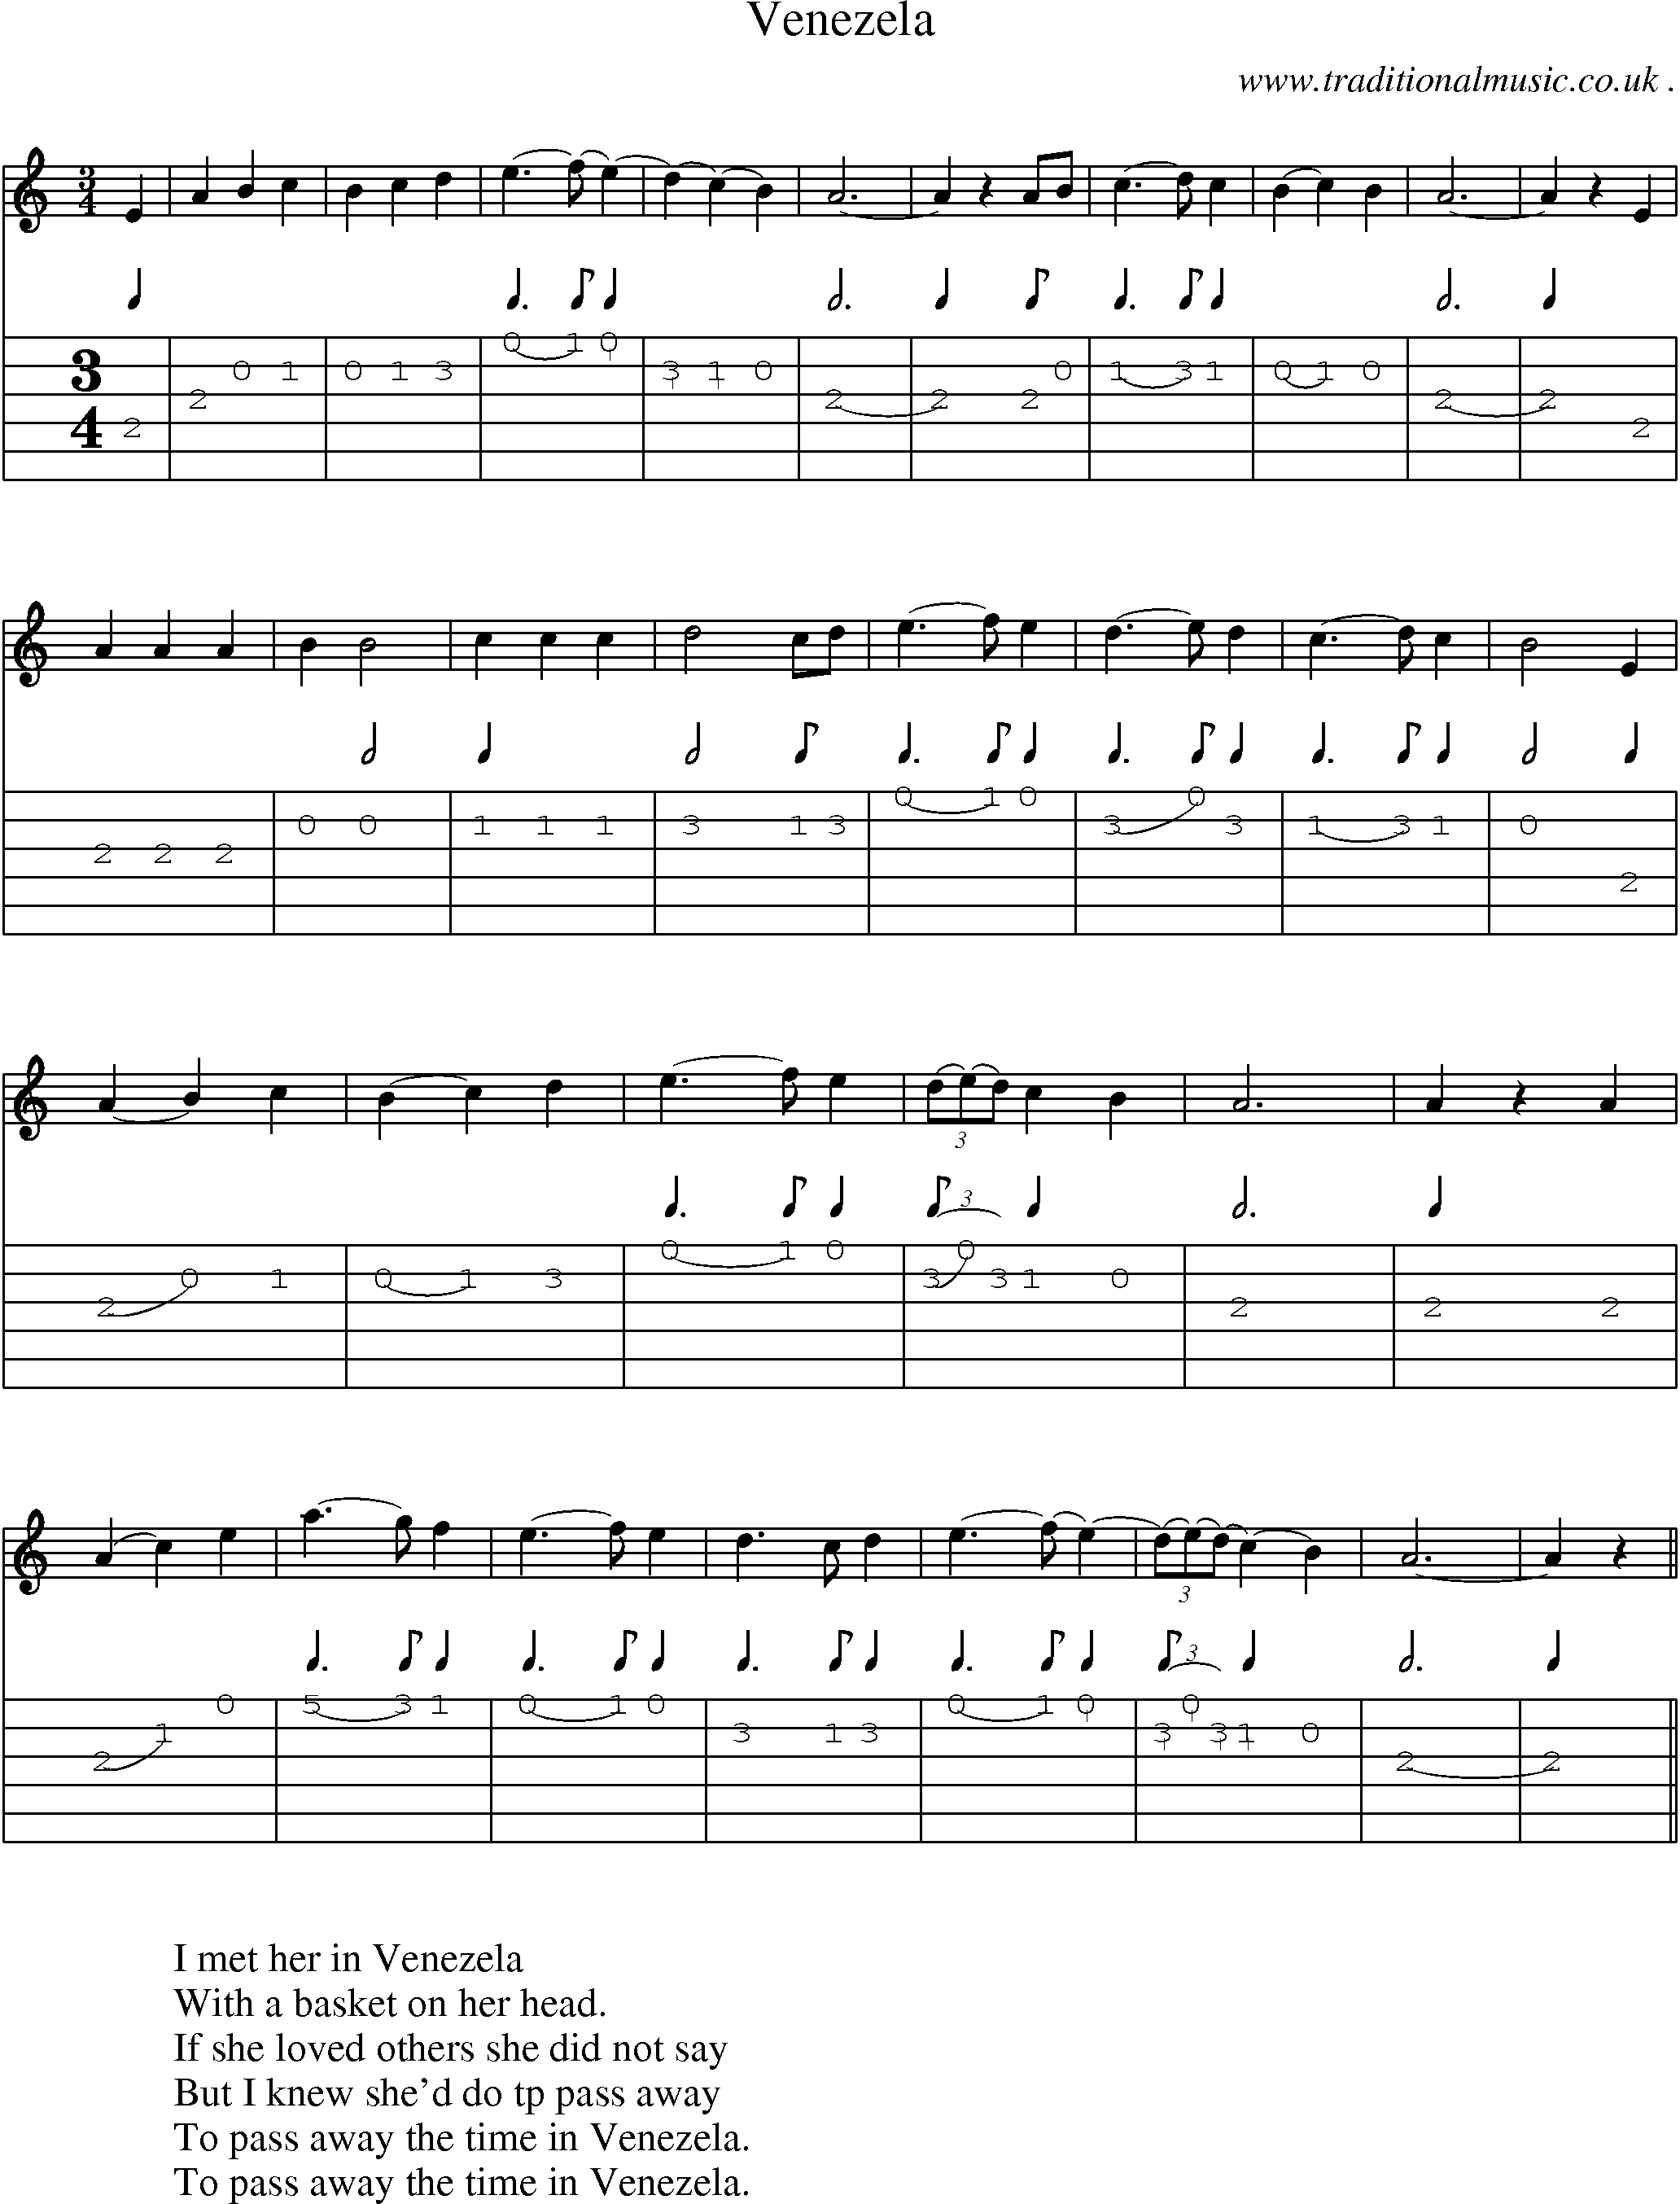 Sheet-Music and Guitar Tabs for Venezela